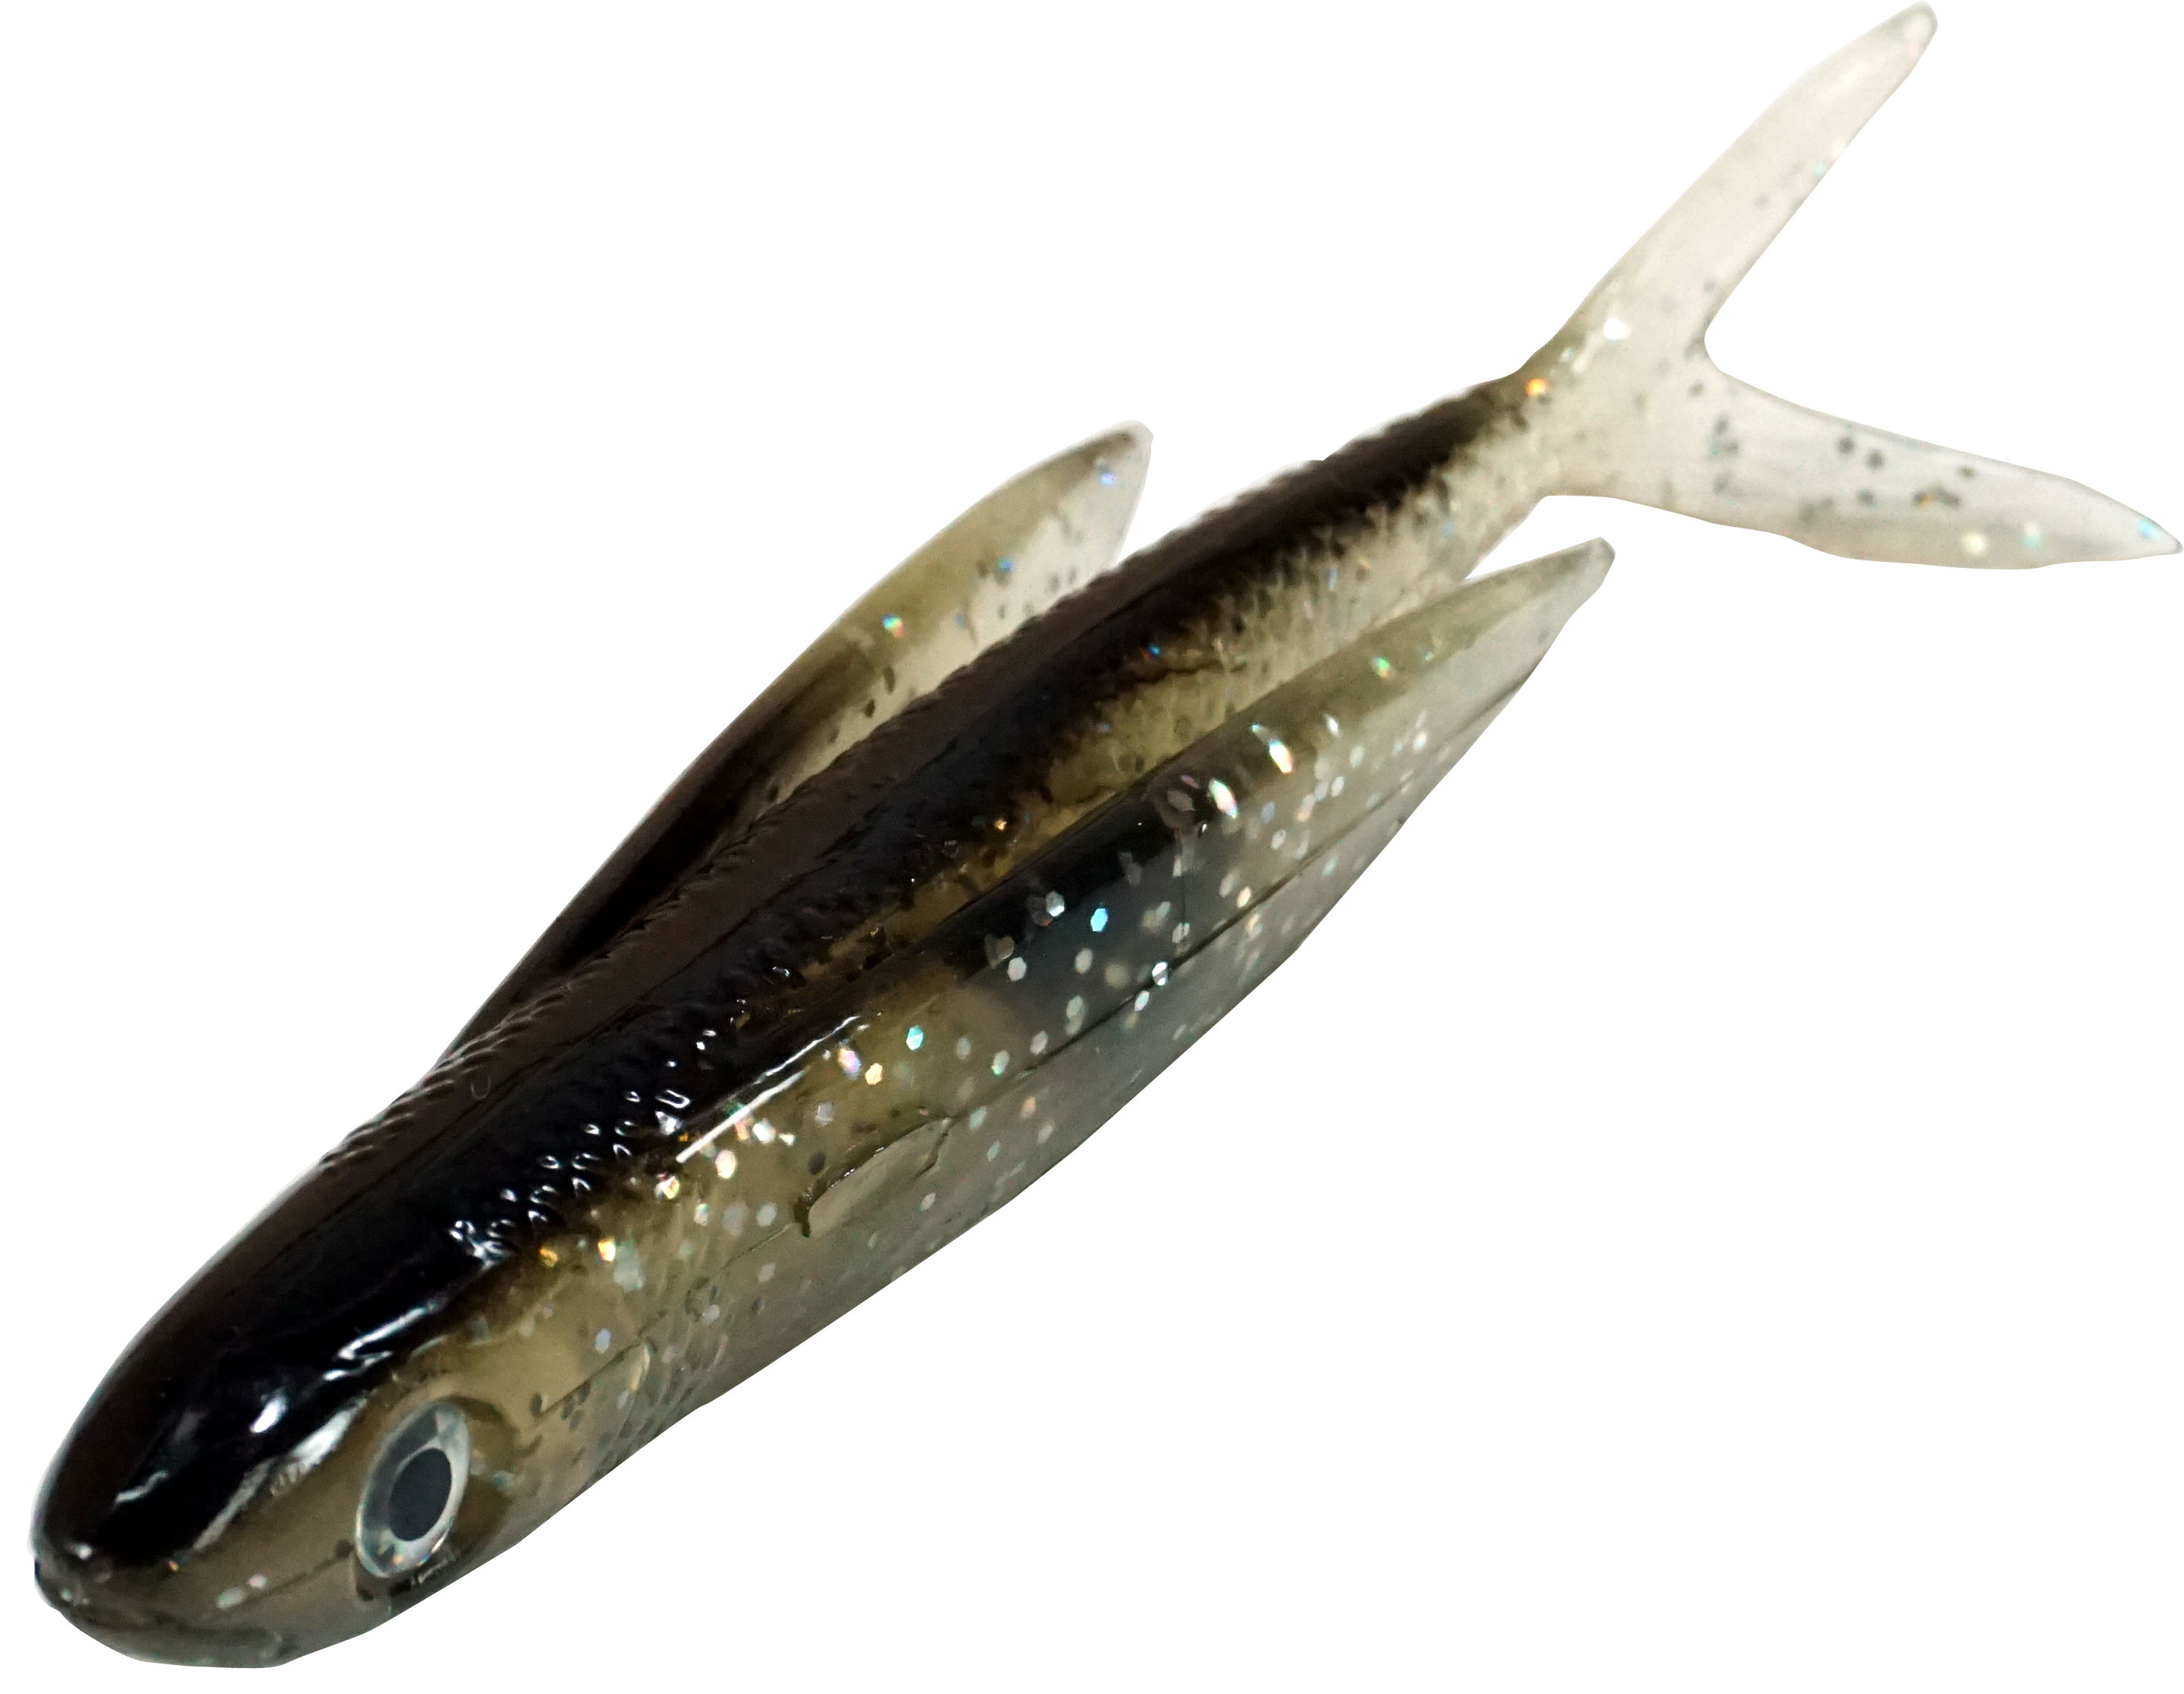 Almost Alive Lures 6" Soft Plastic Flying Fish with Swept Back Wing Bait Black/Clear/Glitter